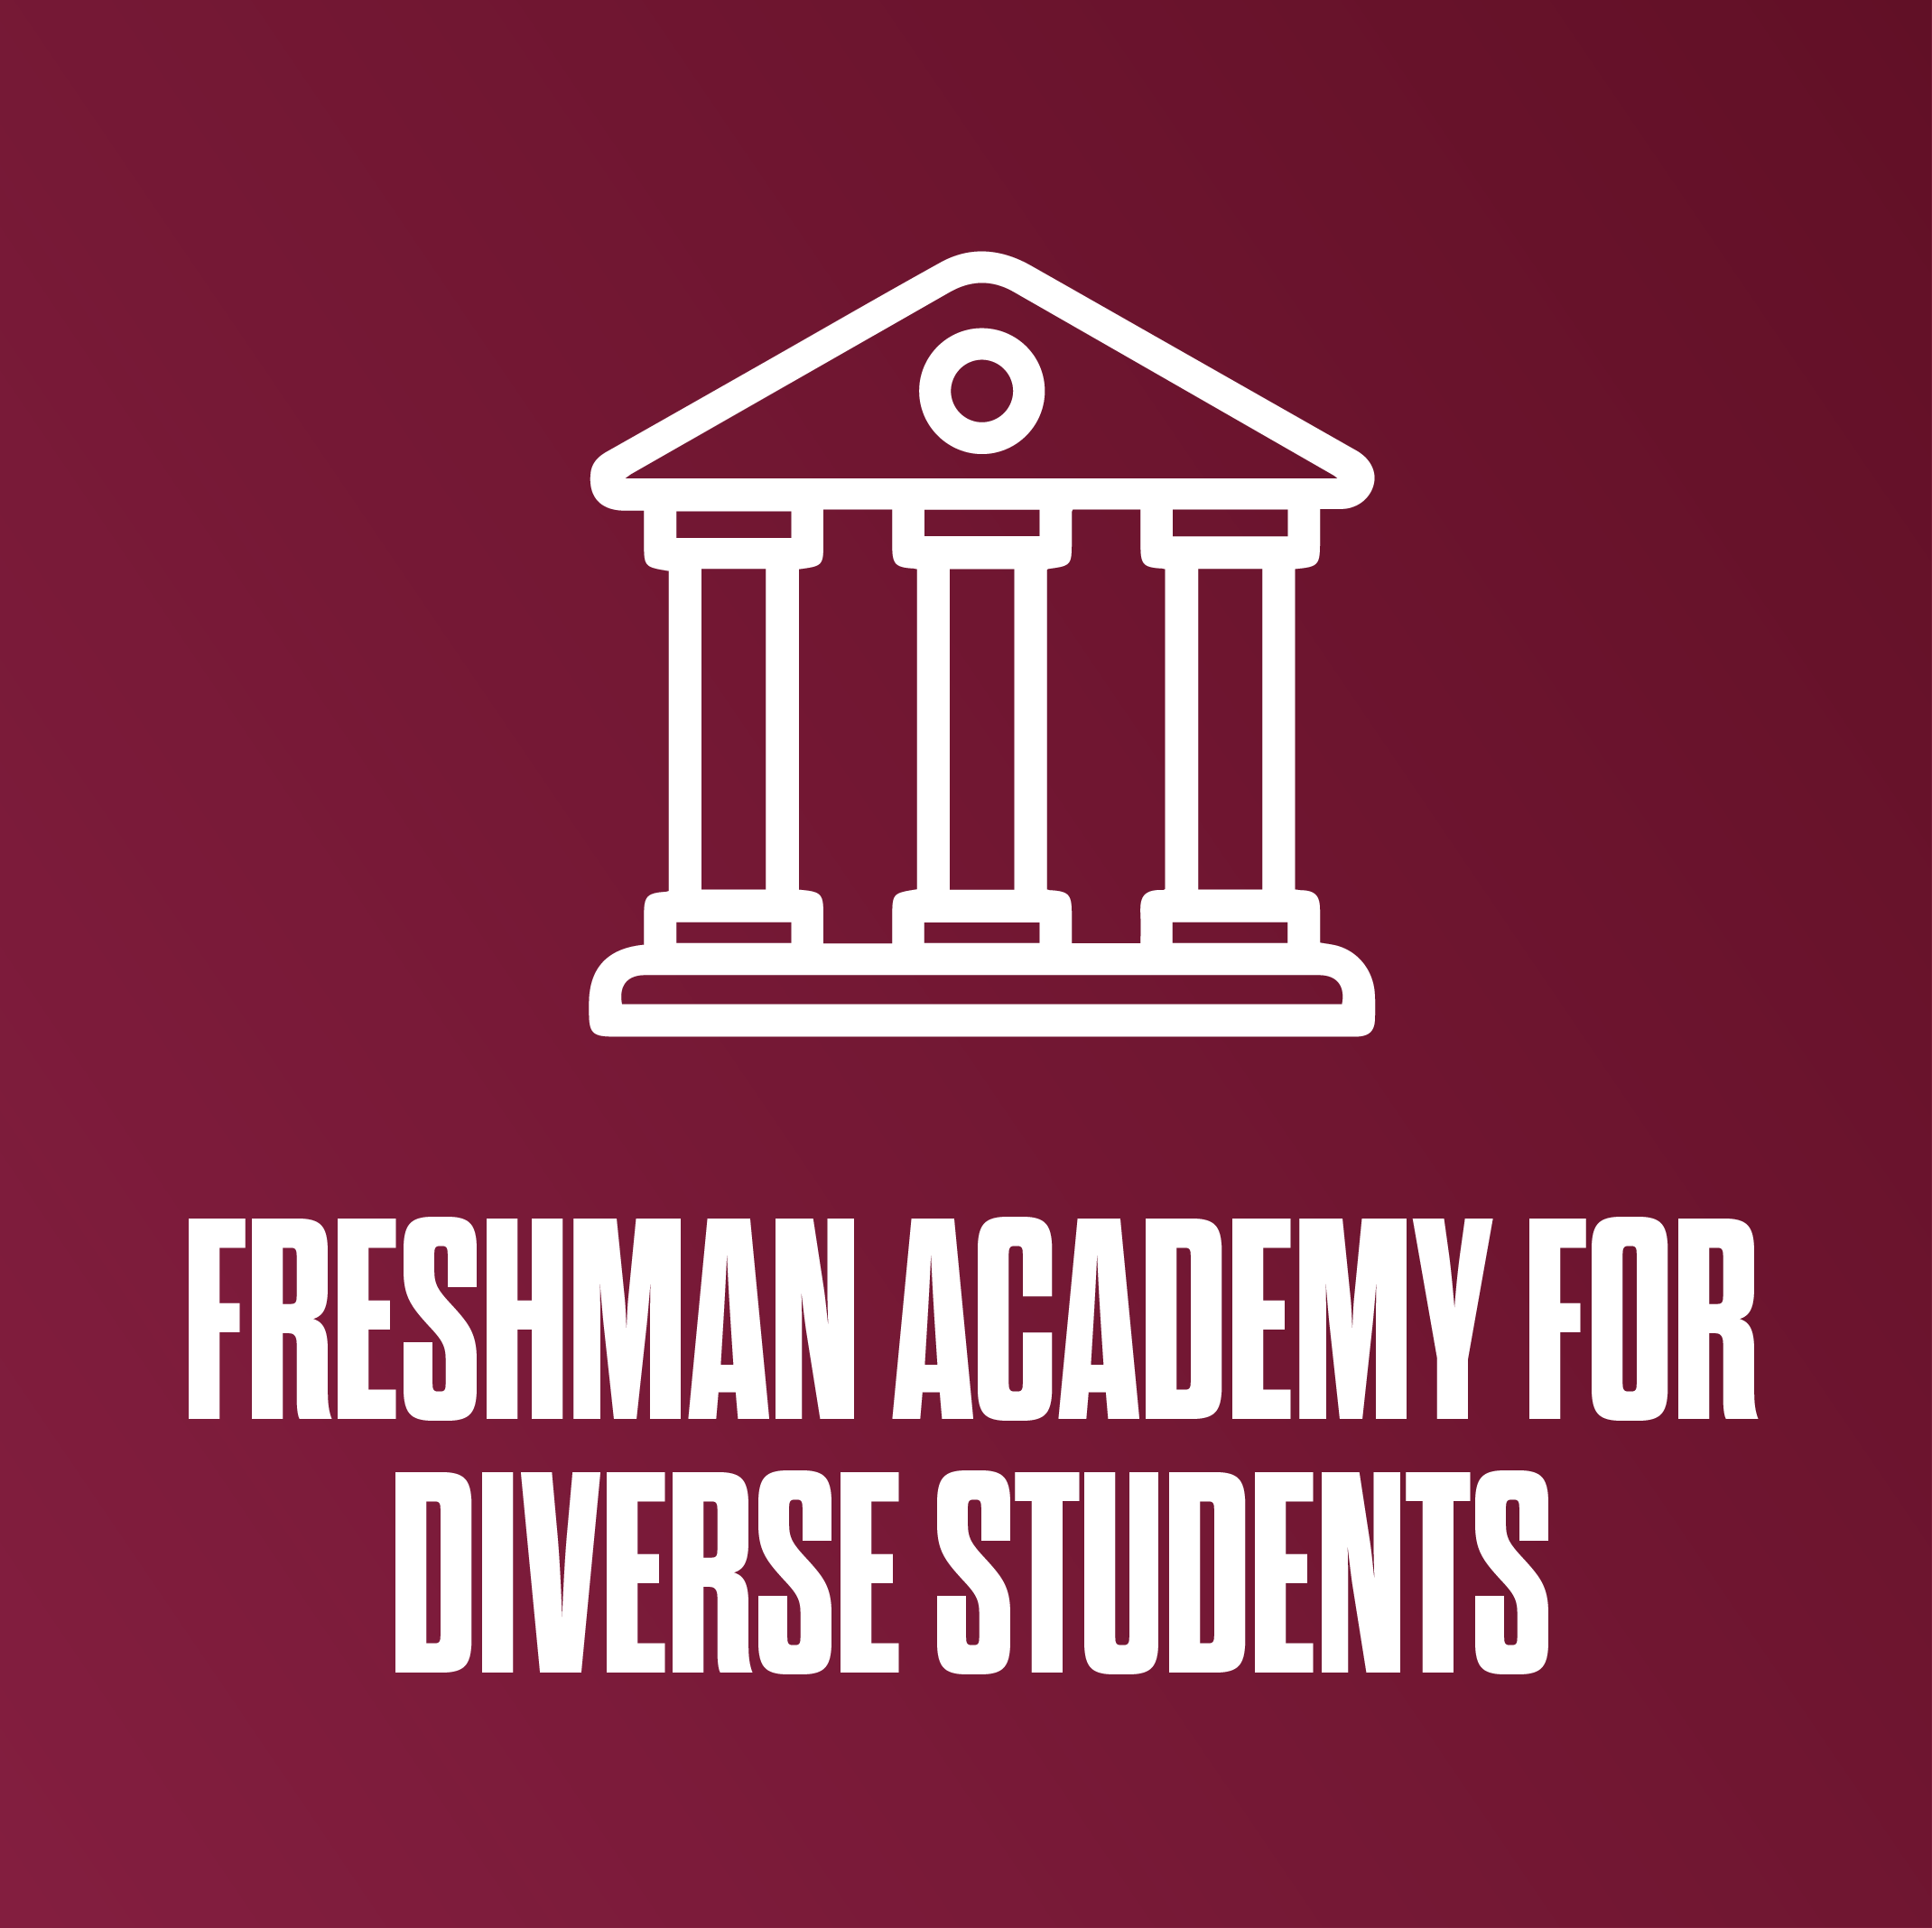 Freshman academy for diverse students at Eastern Kentucky University.